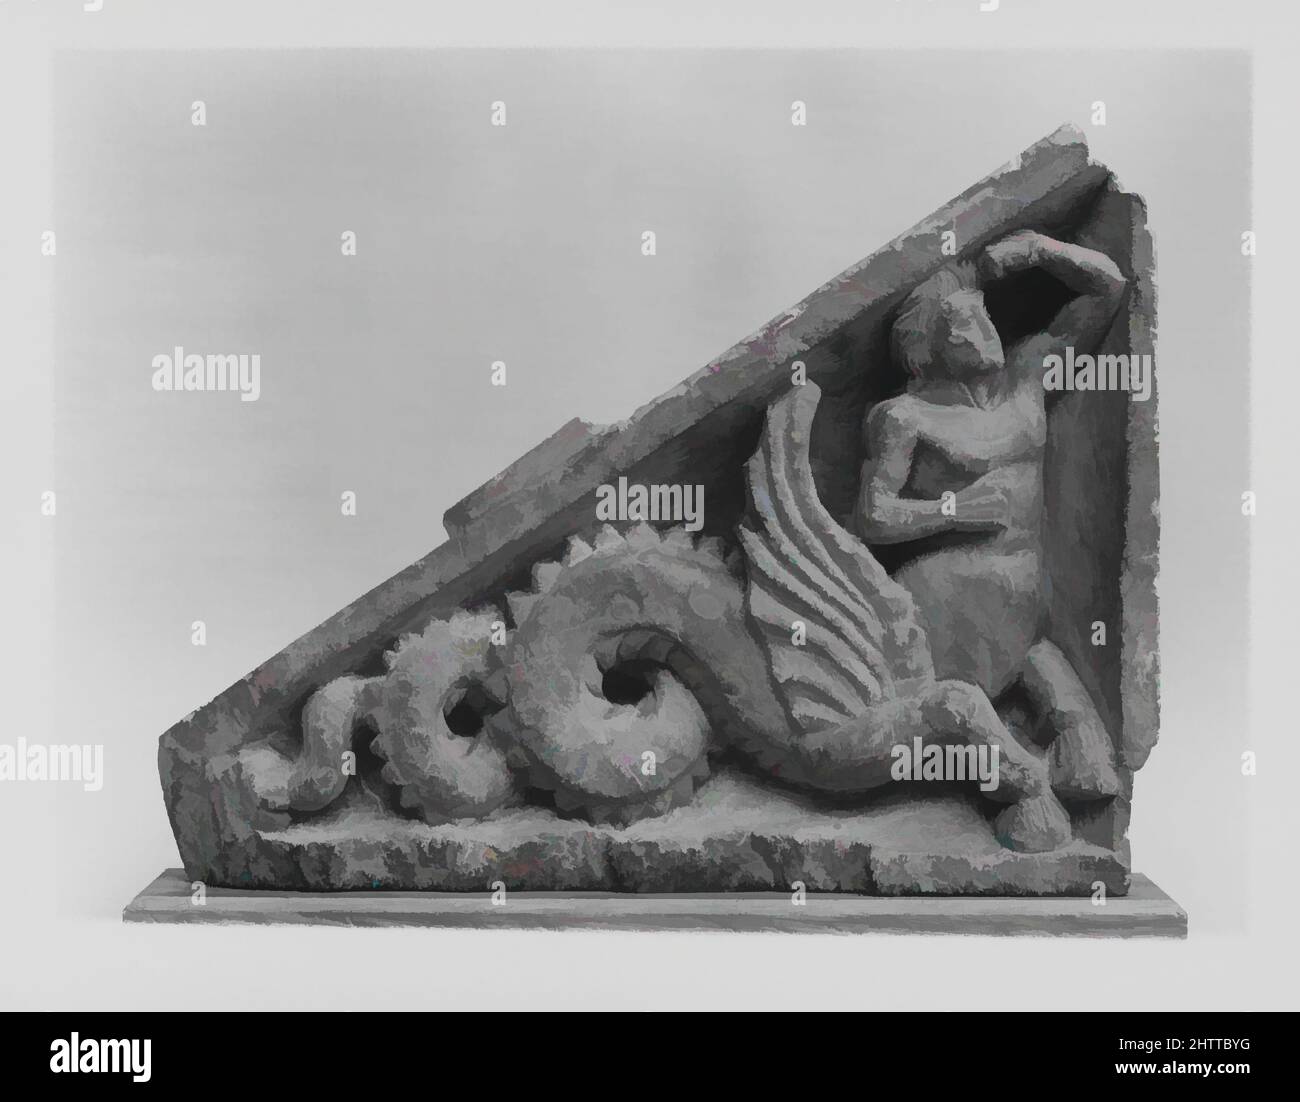 Art inspired by Panel with Marine Deity, 1st century, Pakistan (ancient region of Gandhara), Schist, 7 3/4 x 10 in. (19.7 x 25.4 cm), Sculpture, Classic works modernized by Artotop with a splash of modernity. Shapes, color and value, eye-catching visual impact on art. Emotions through freedom of artworks in a contemporary way. A timeless message pursuing a wildly creative new direction. Artists turning to the digital medium and creating the Artotop NFT Stock Photo